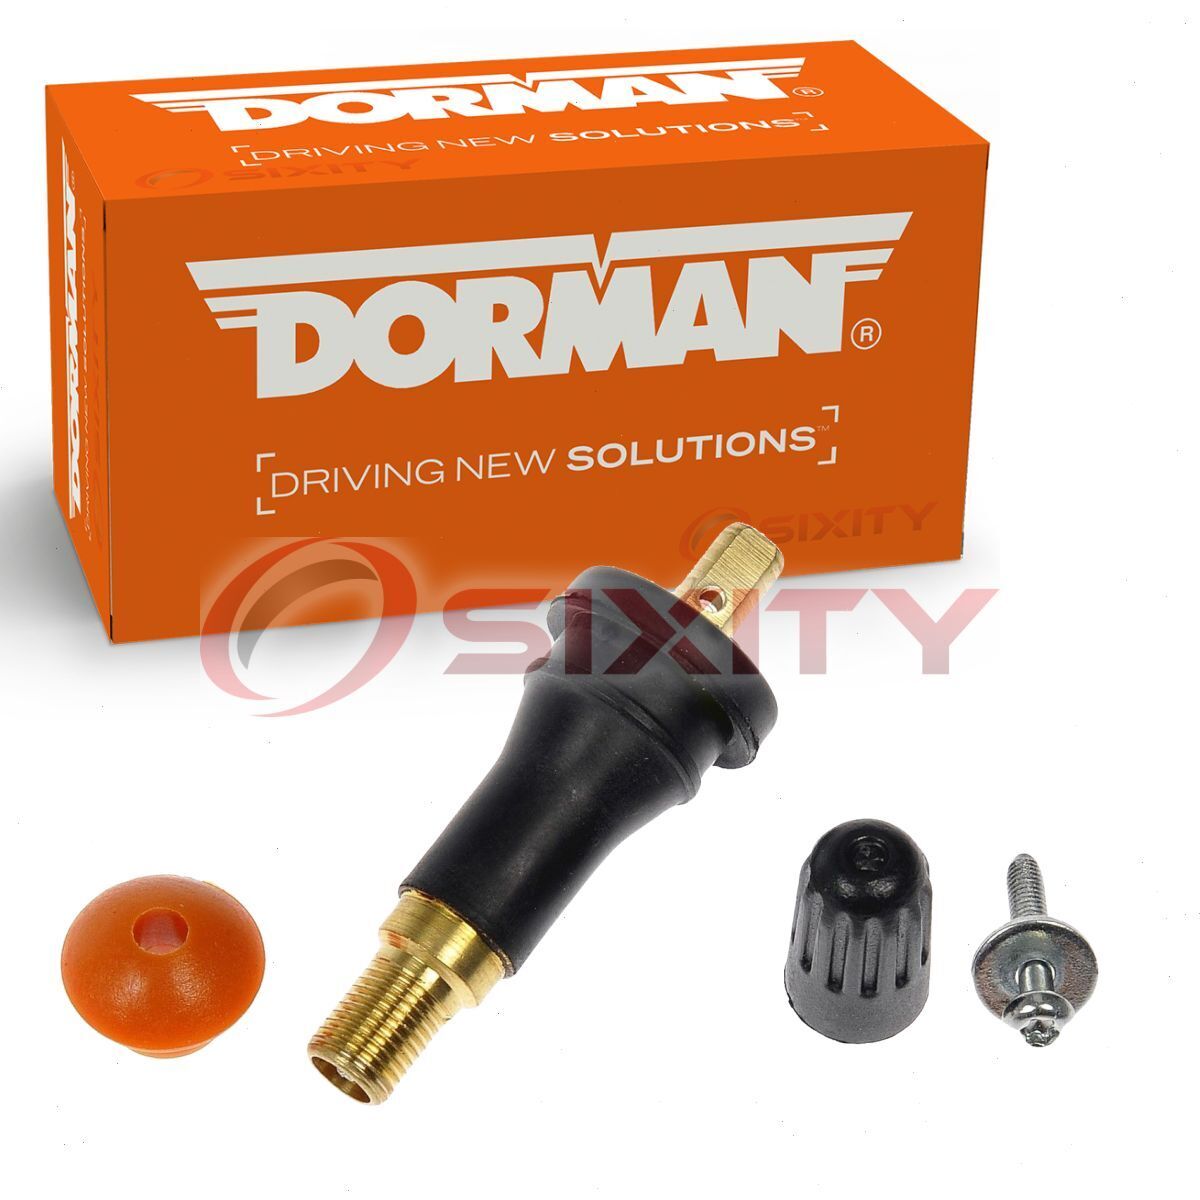 Dorman TPMS Valve Kit for 1999 BMW 323is Tire Pressure Monitoring System  pq